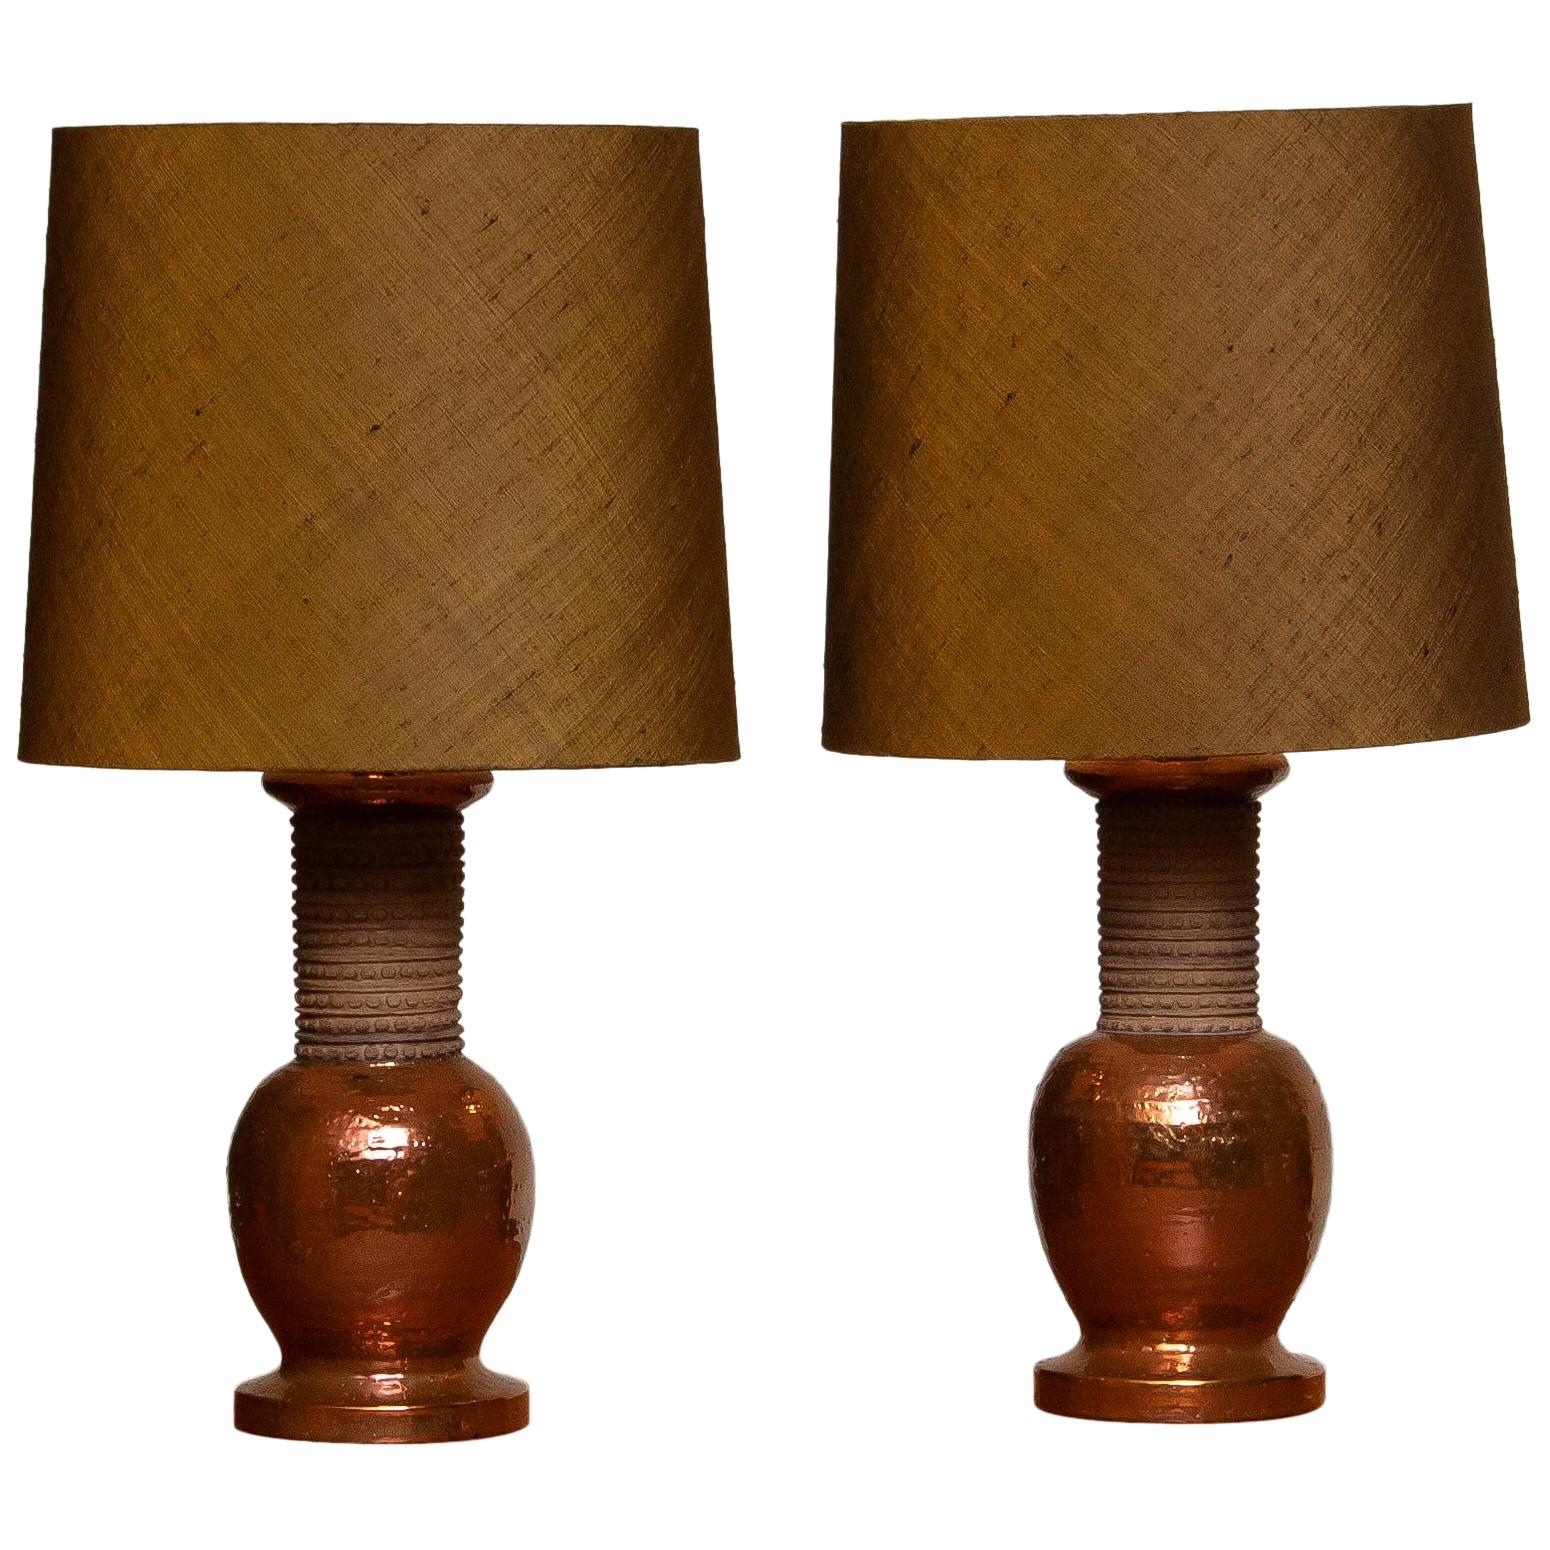 1960s, Pair of Ceramic and Copper Bitossi Italy Table Lamps for Bergboms, Sweden